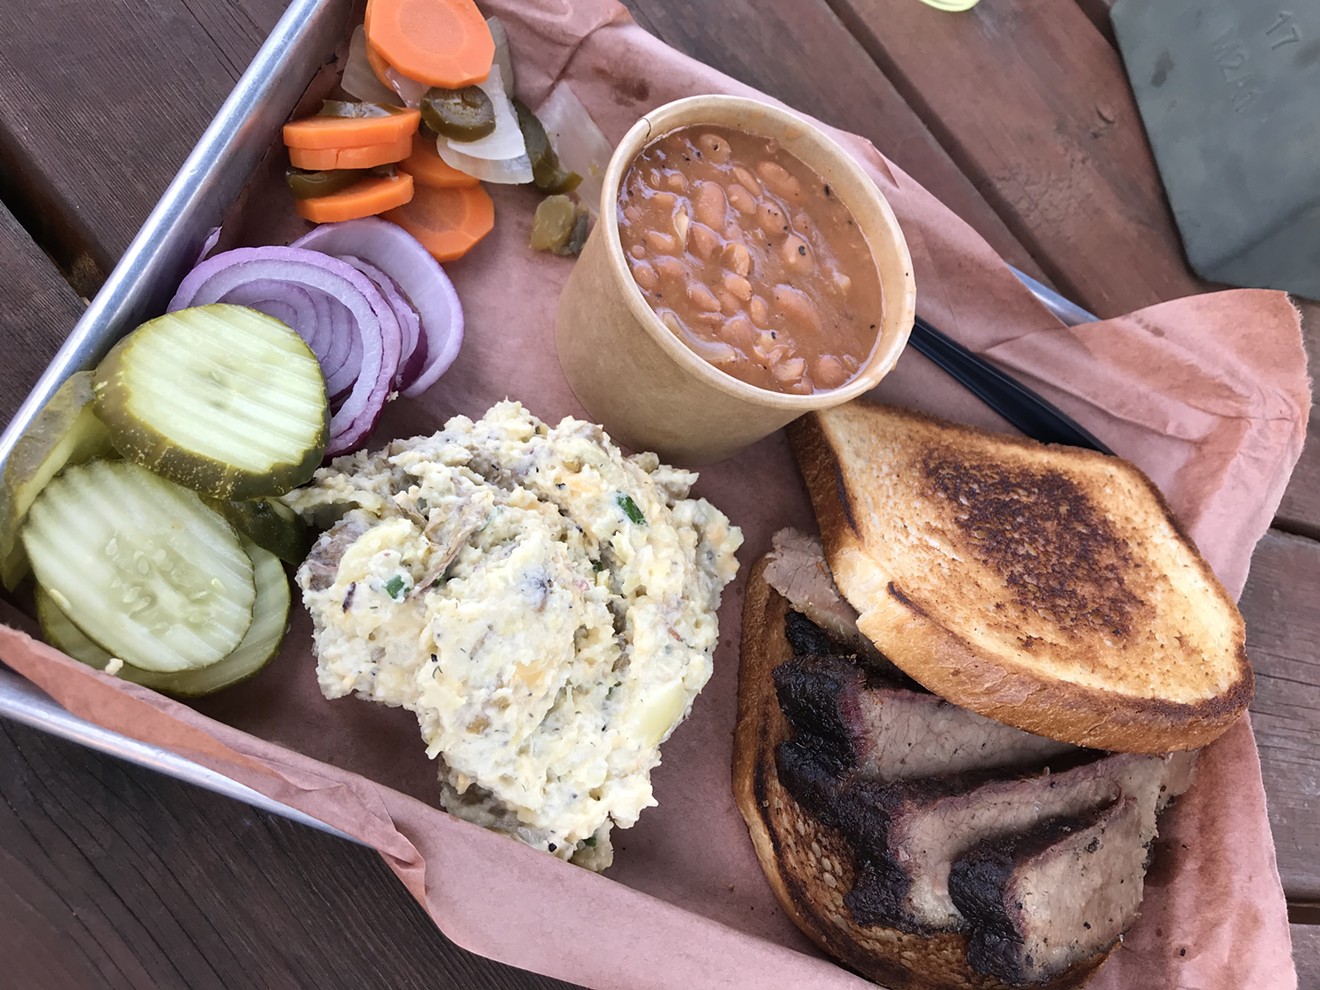 On Tuesdays and Thursdays, you can get one meat, a side and a drink for $10.50 at Bumbershoot Barbecue.